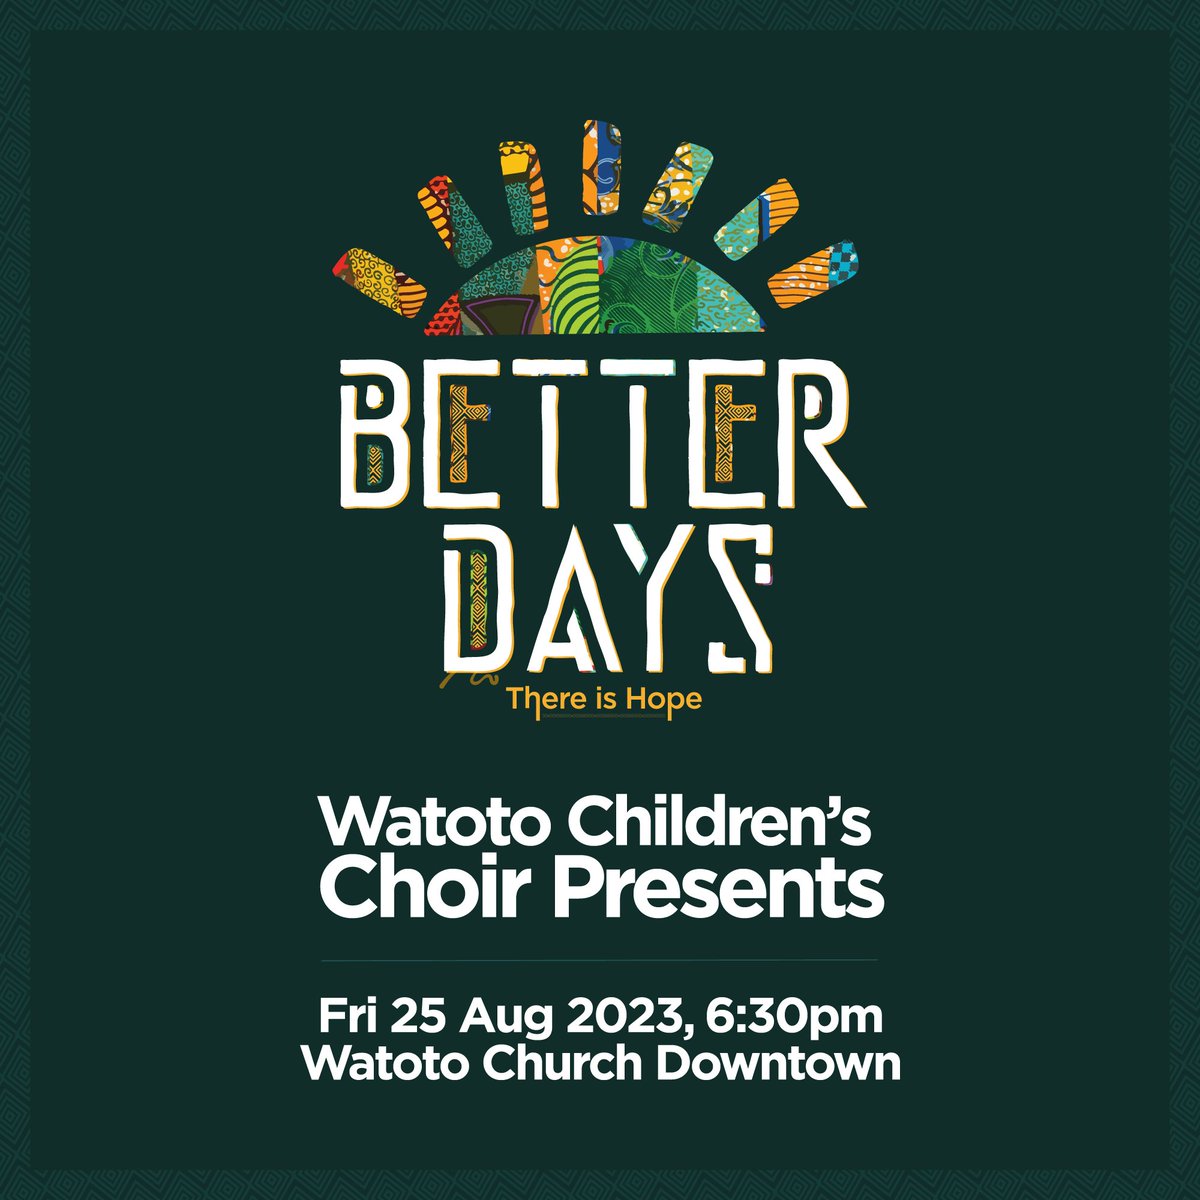 Better Days - There is Hope! The new Watoto Children’s Choir’s album is a firm declaration of unrelenting hope and faith in God. You are invited to a special concert on Friday, 25 August, 6:30pm at Watoto Church Downtown. #BetterDays #WatotoChildrensChoir